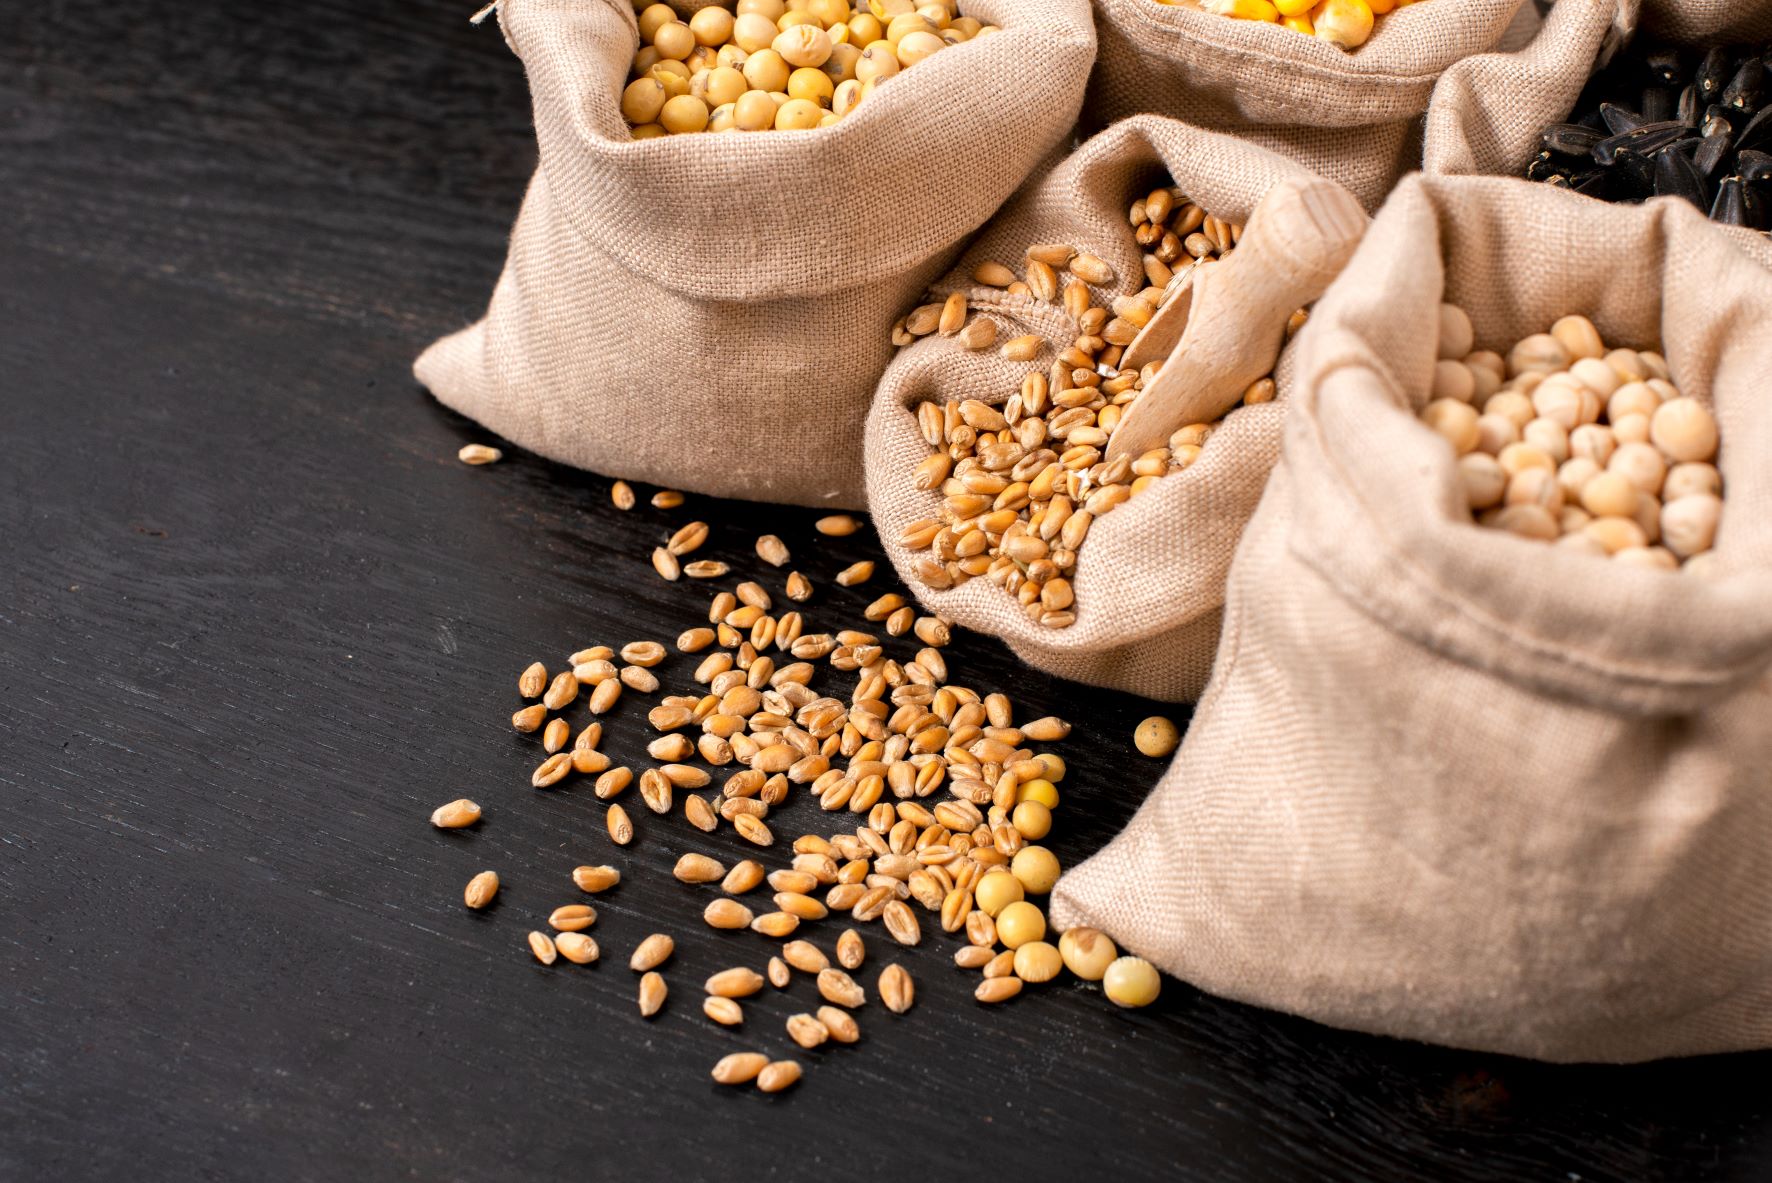 What should we watch in the global grains and oilseeds market?